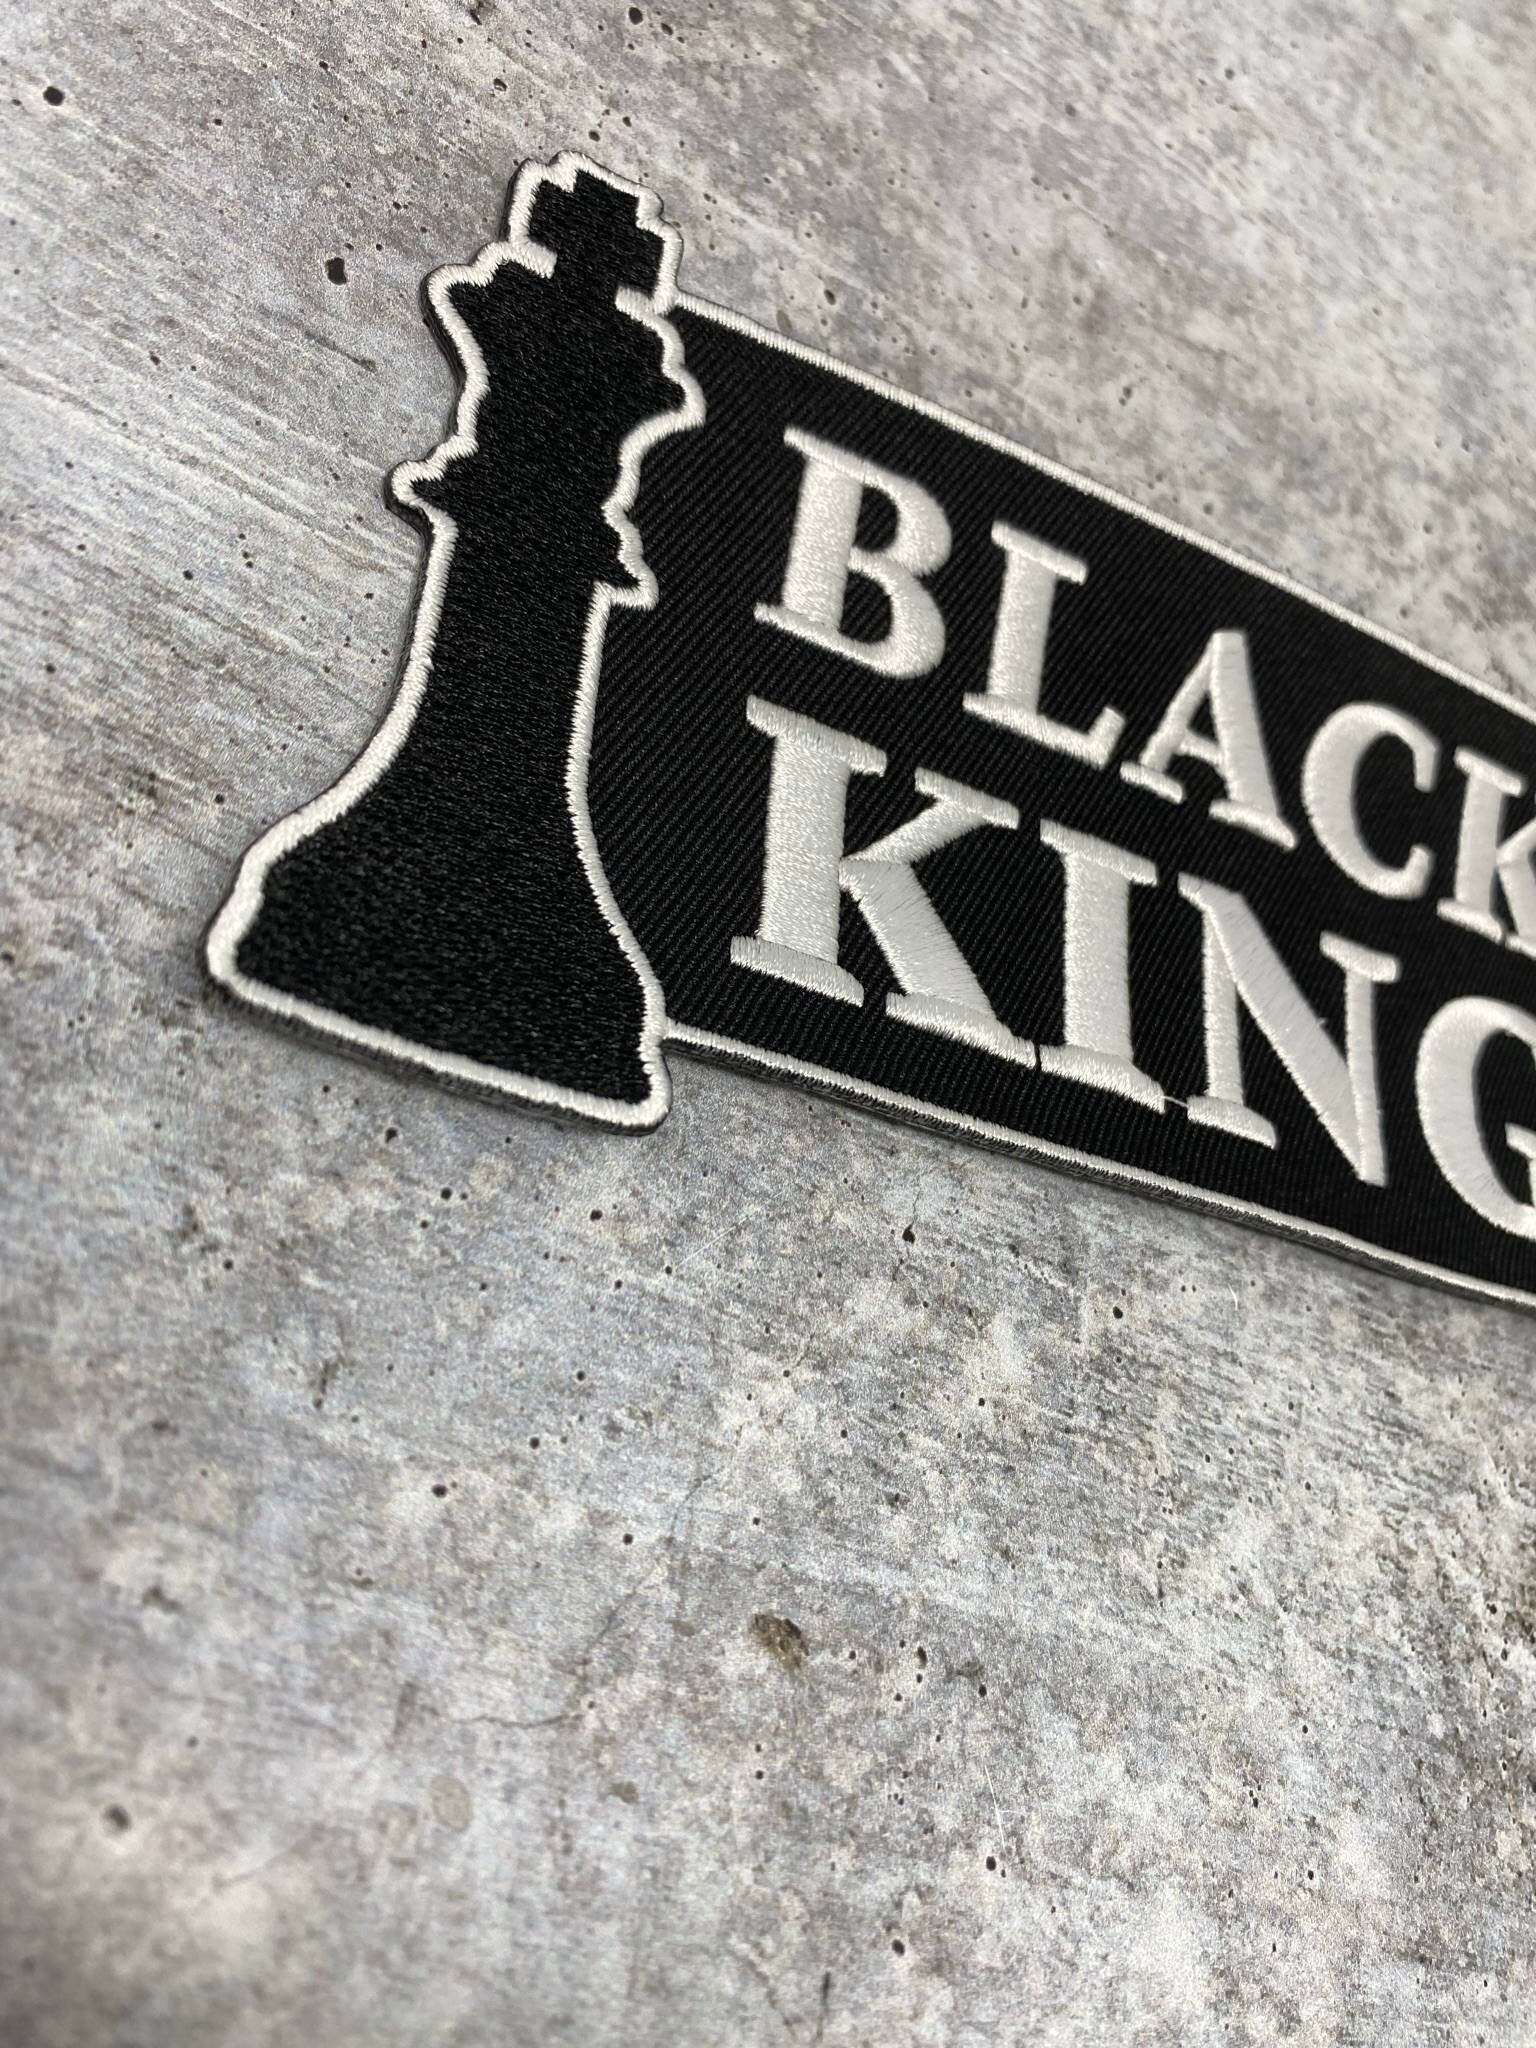 New, 1 pc, "Black King", Blk & White w/Chess Piece Patch, Iron-on Embroidered Patch; Africa Patch, Popular Patches, Patches for Men, Size 6"